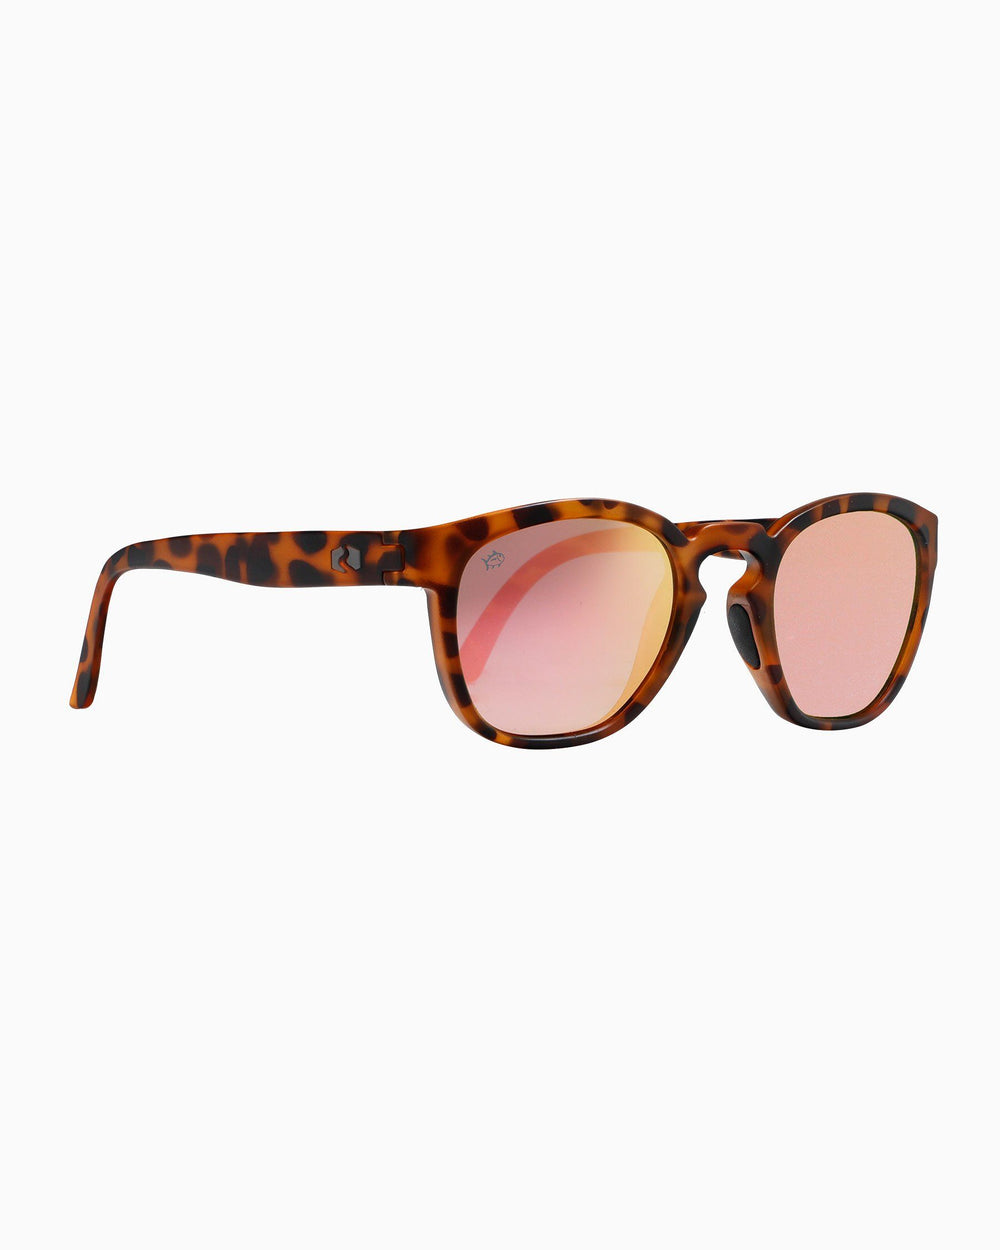 Polarized Lens Sunglasses for Men and Women | Rheos x Southern Tide